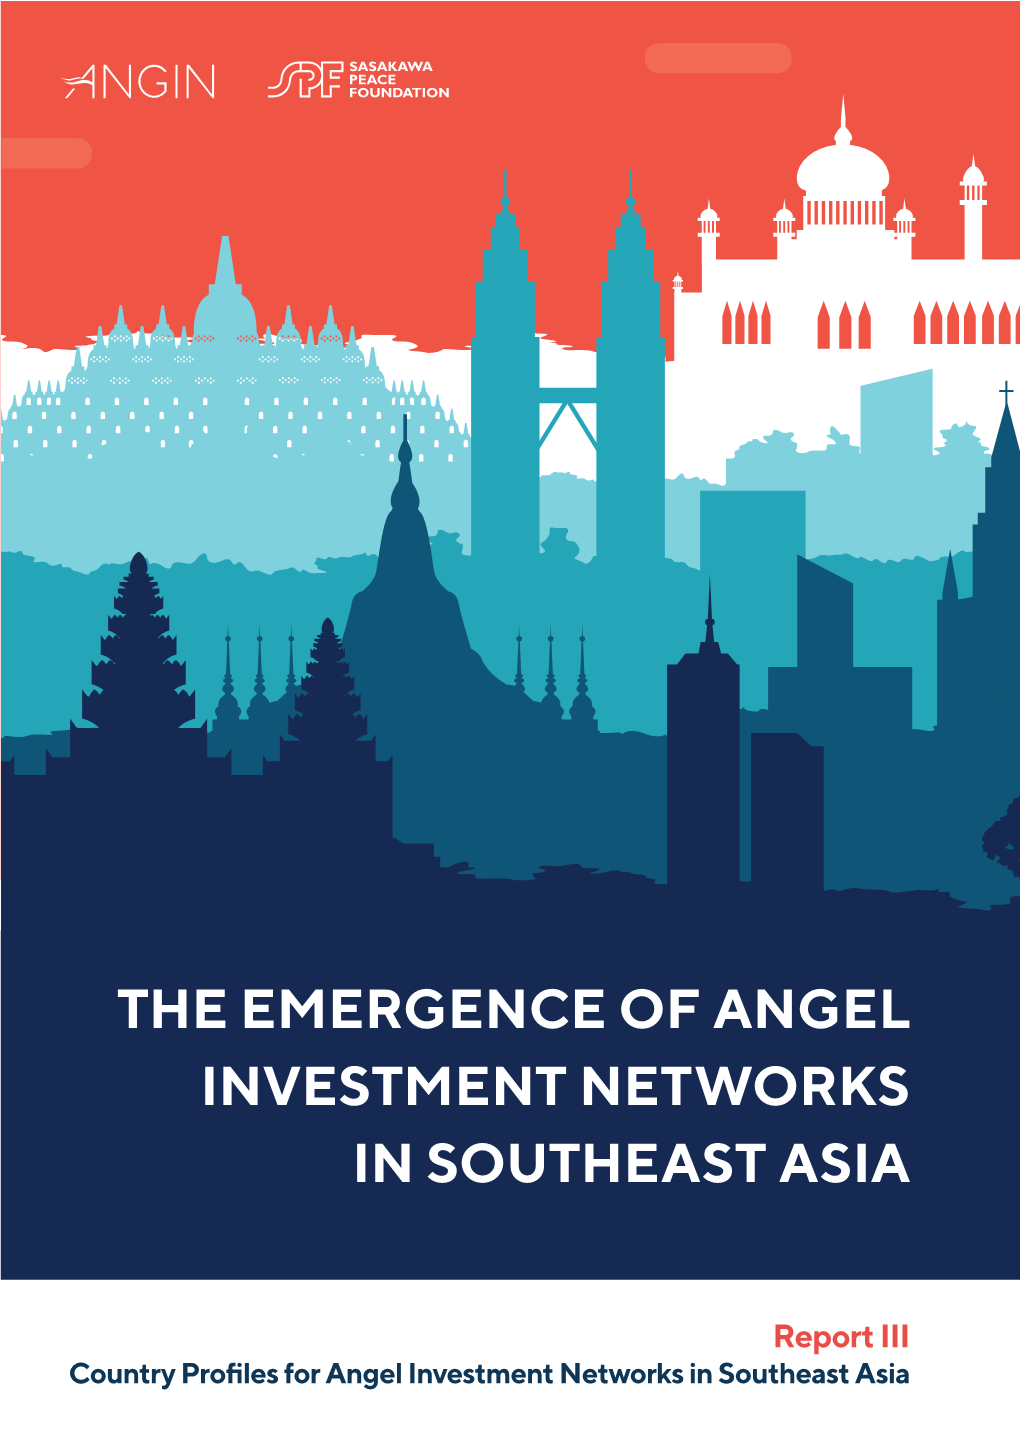 The Emergence of Angel Investment Networks in Southeast Asia